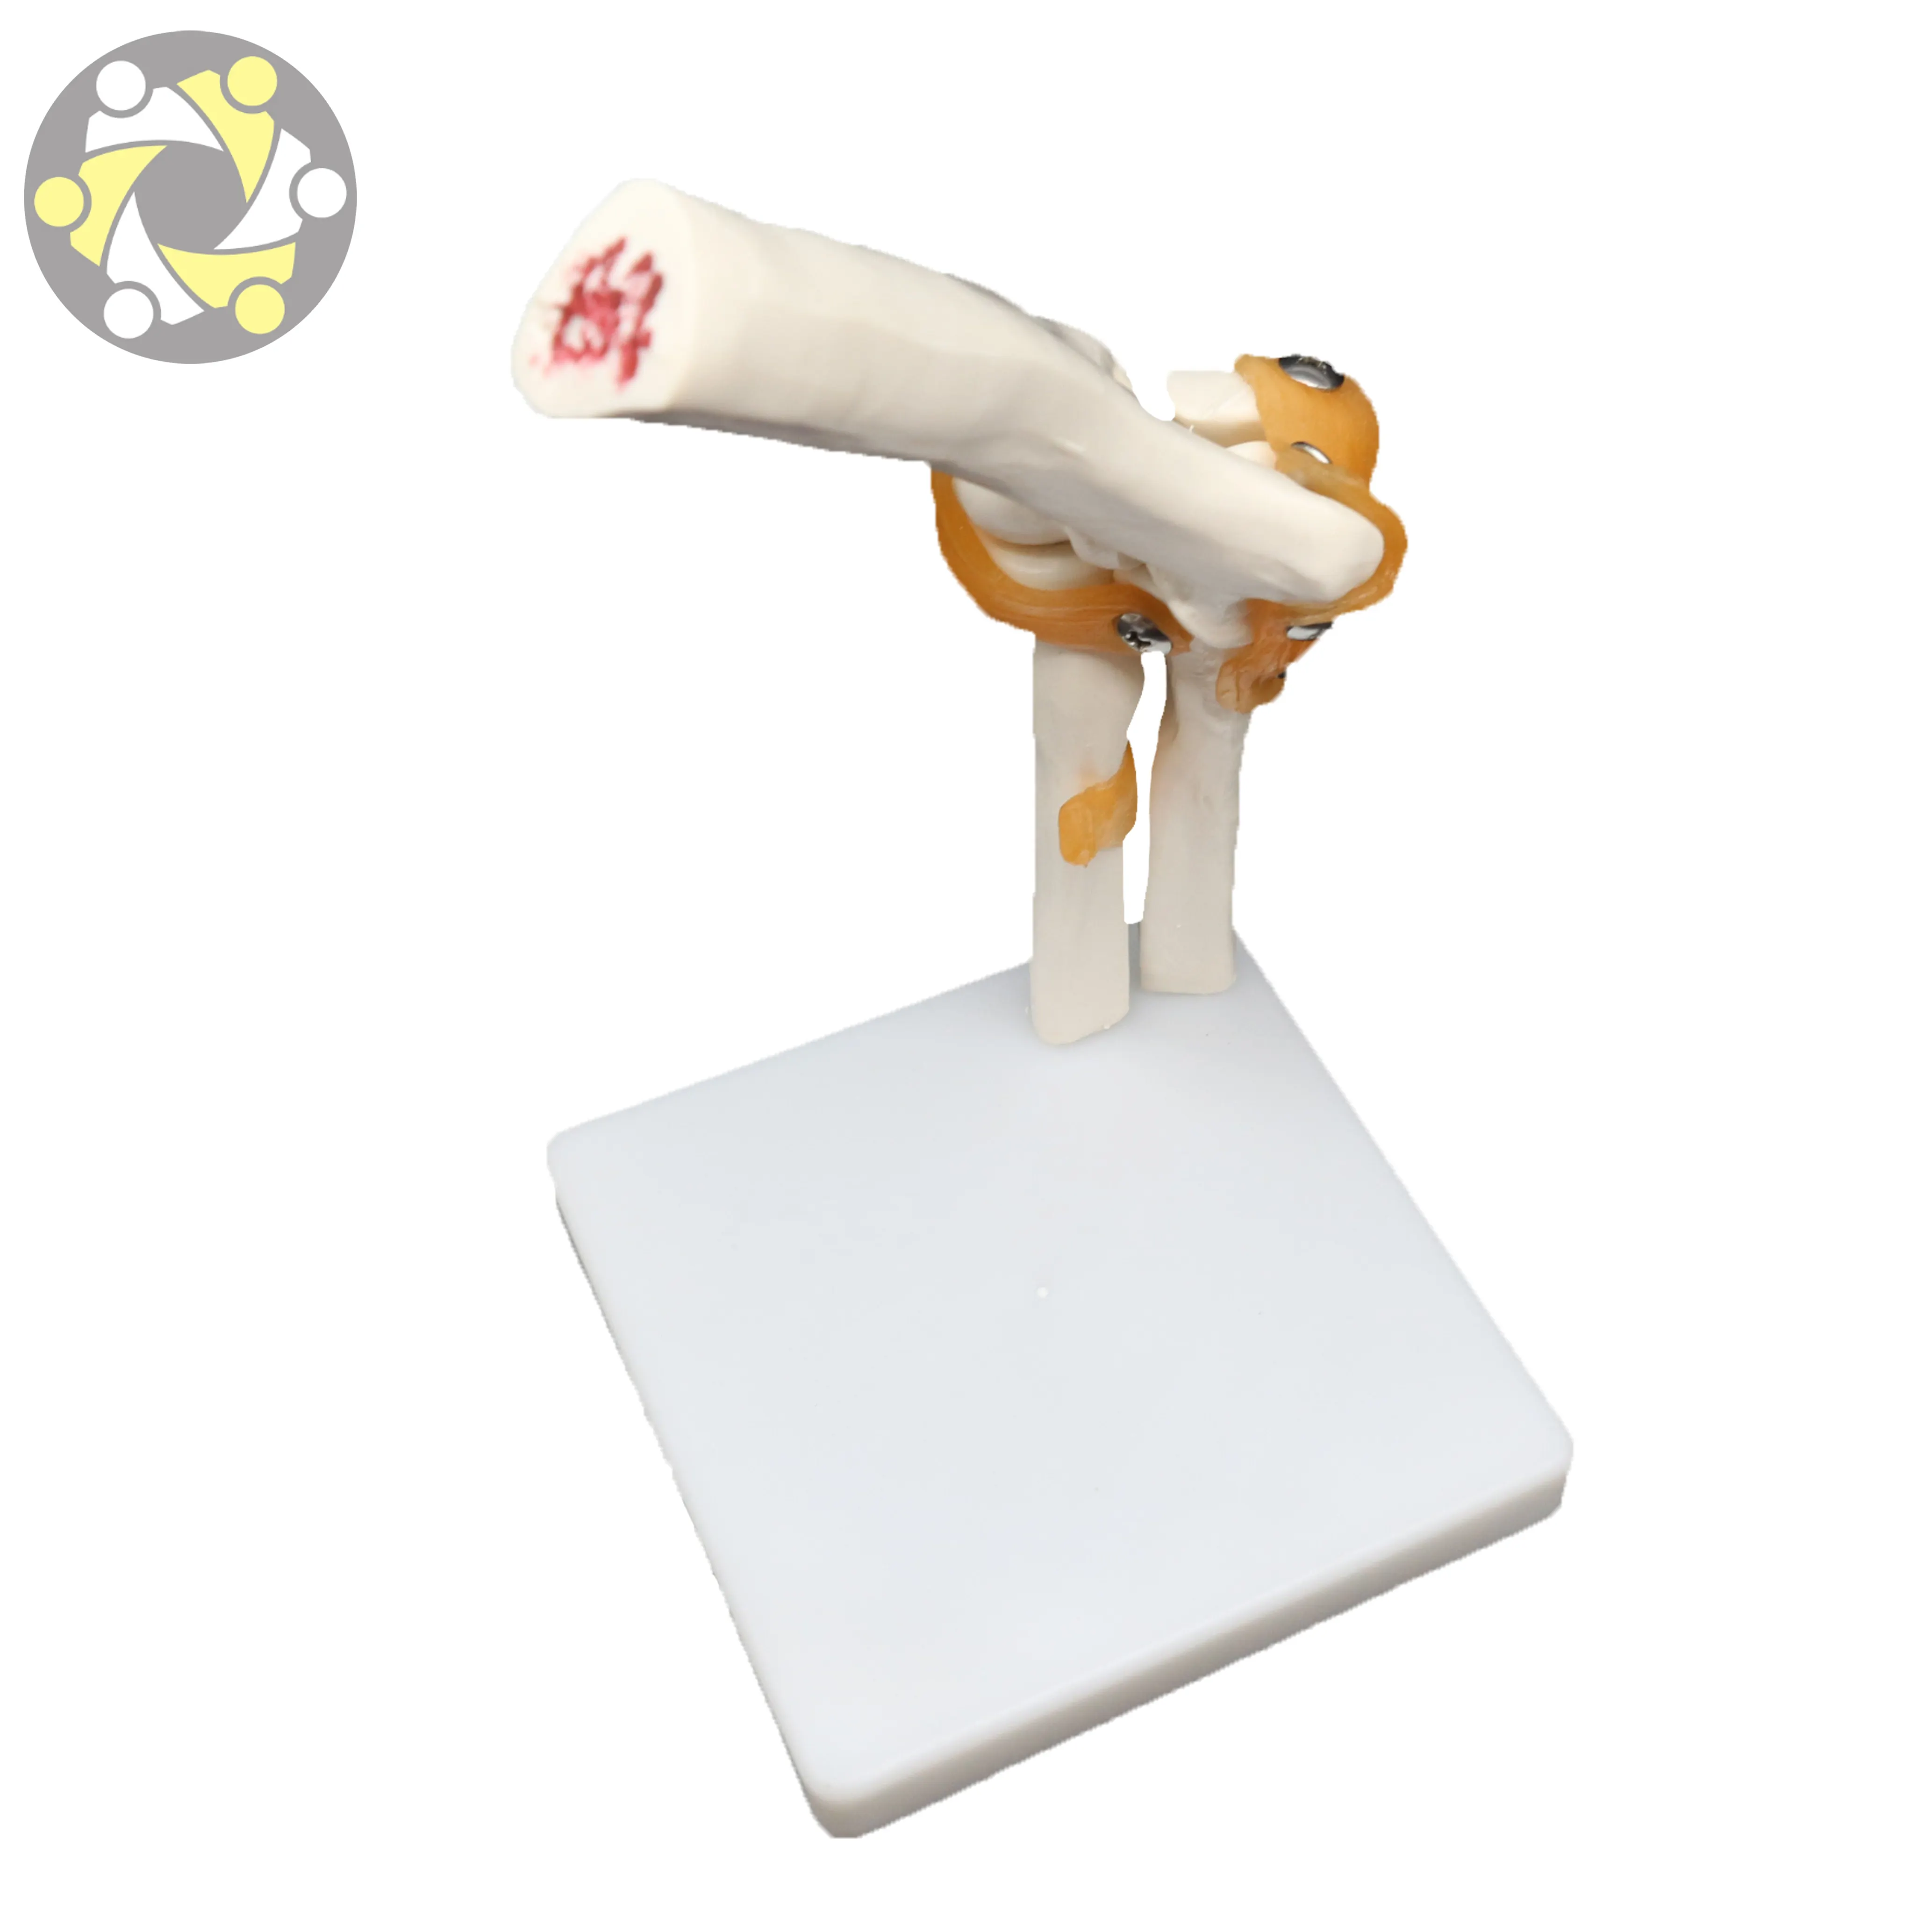 Human Skeleton Model of Plastic Elbow Joint for Medical Science Teaching